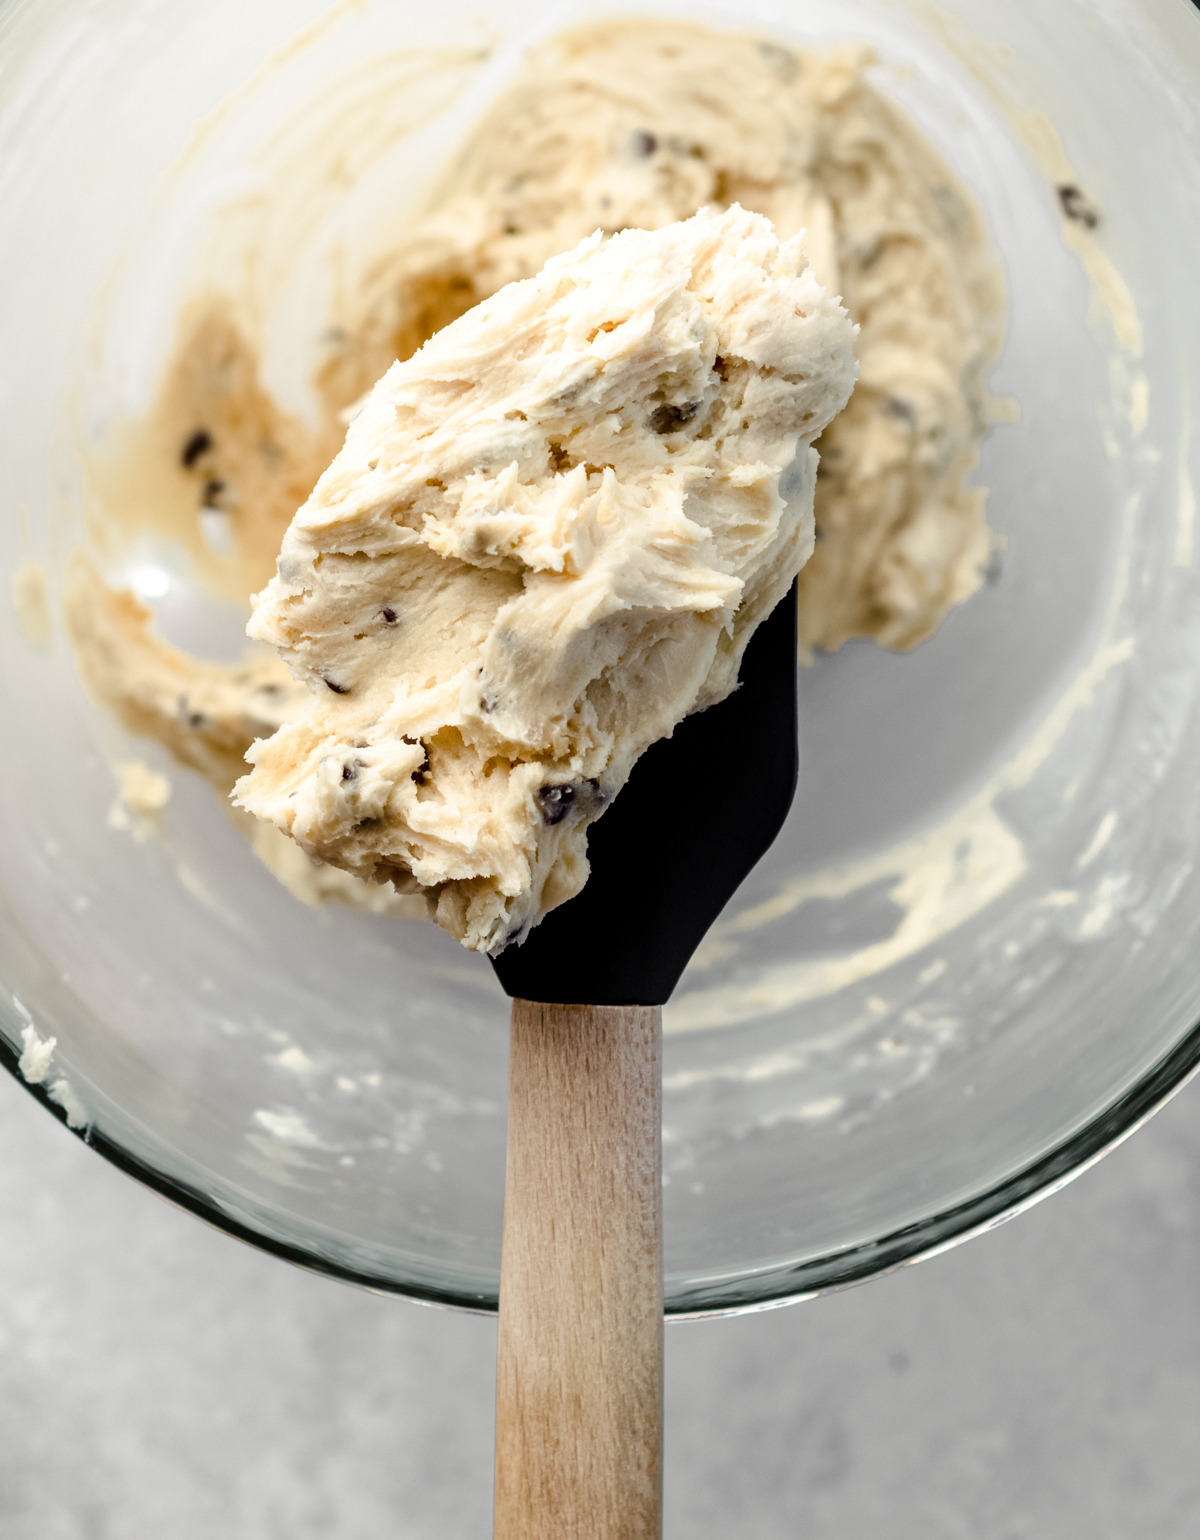 Cookie dough frosting on a spatula being held above a glass bowl.